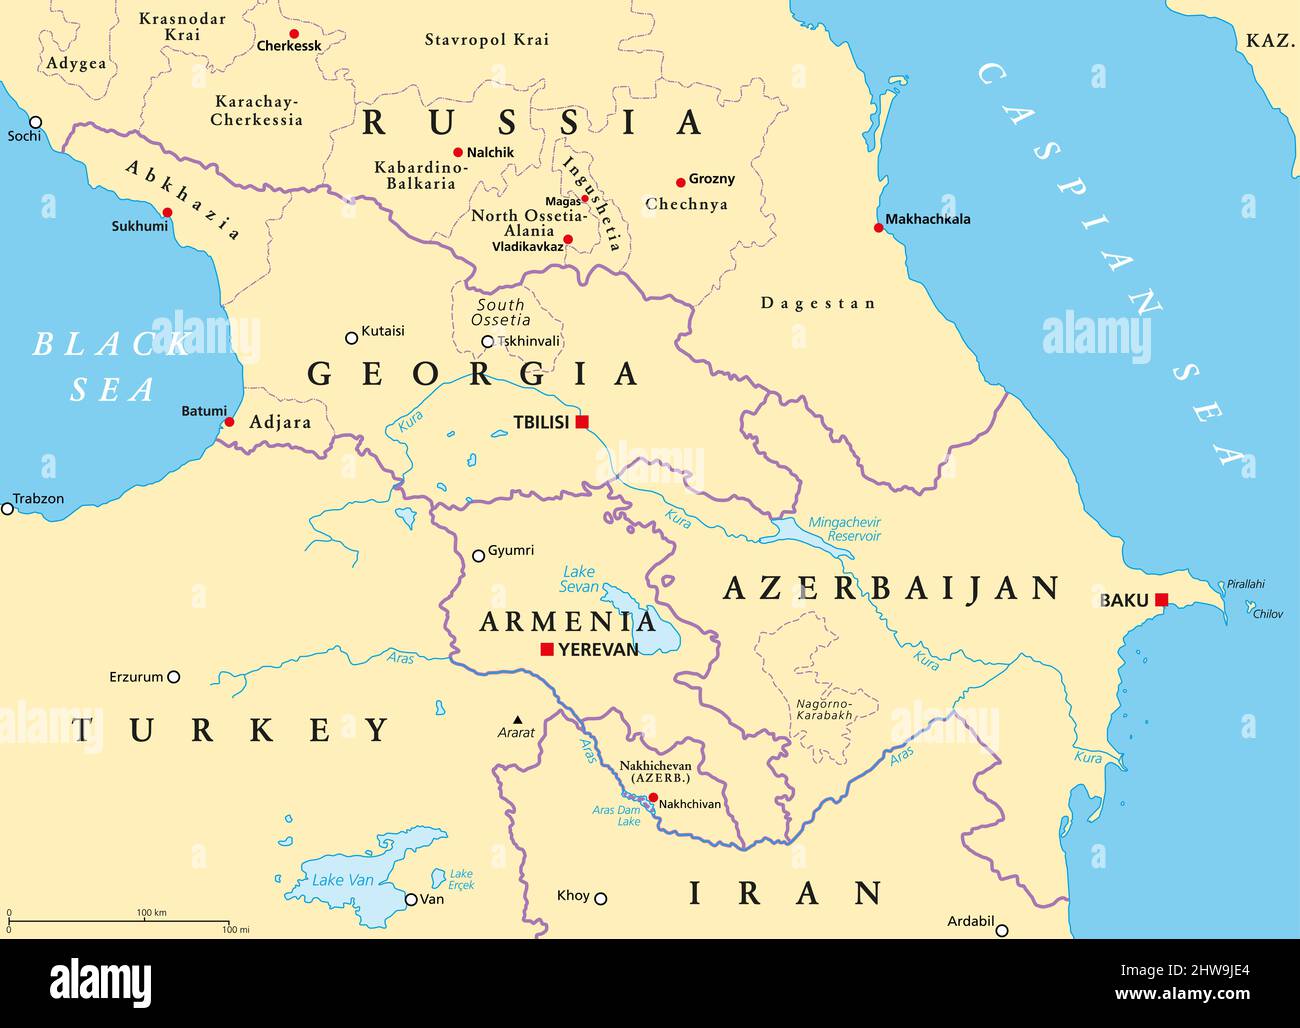 Caucasus, Caucasia, political map. Region between Black and Caspian Sea, mainly occupied by Armenia, Azerbaijan, Georgia, and parts of Southern Russia. Stock Photo